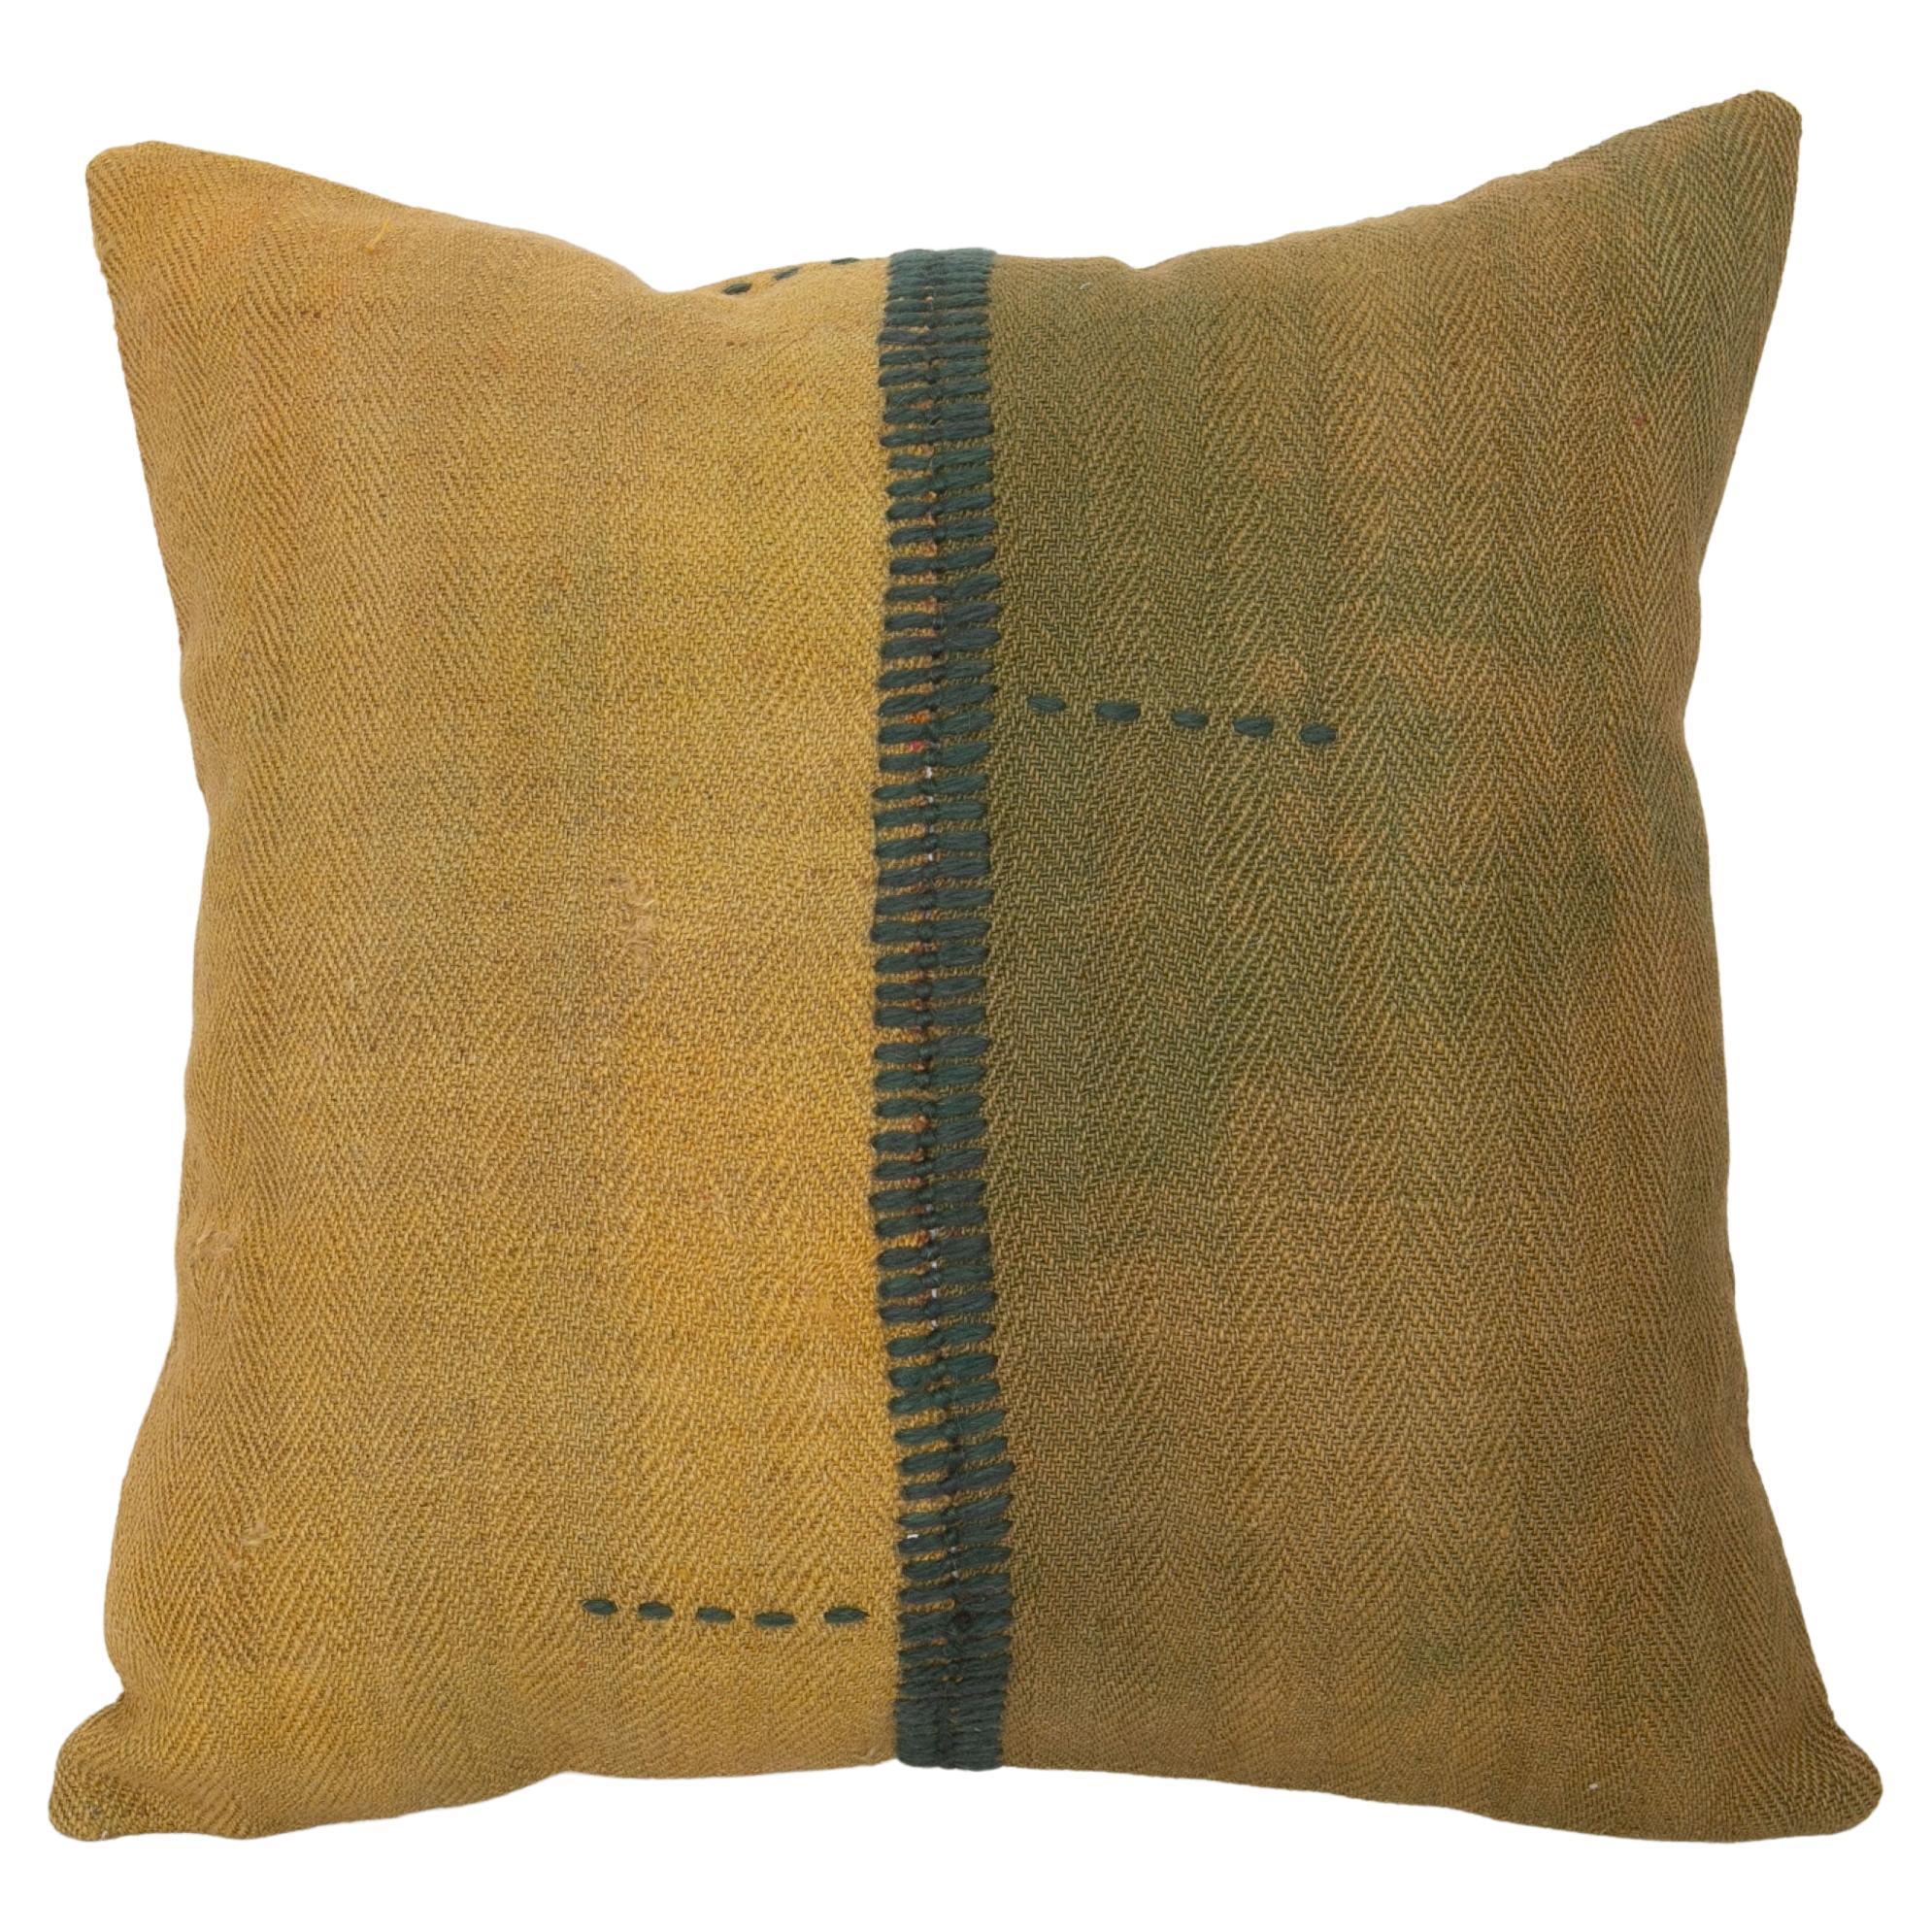 Pillowcase Made from an Eastern Anatolian Perde ‘ Cover’, Mid 20th C For Sale